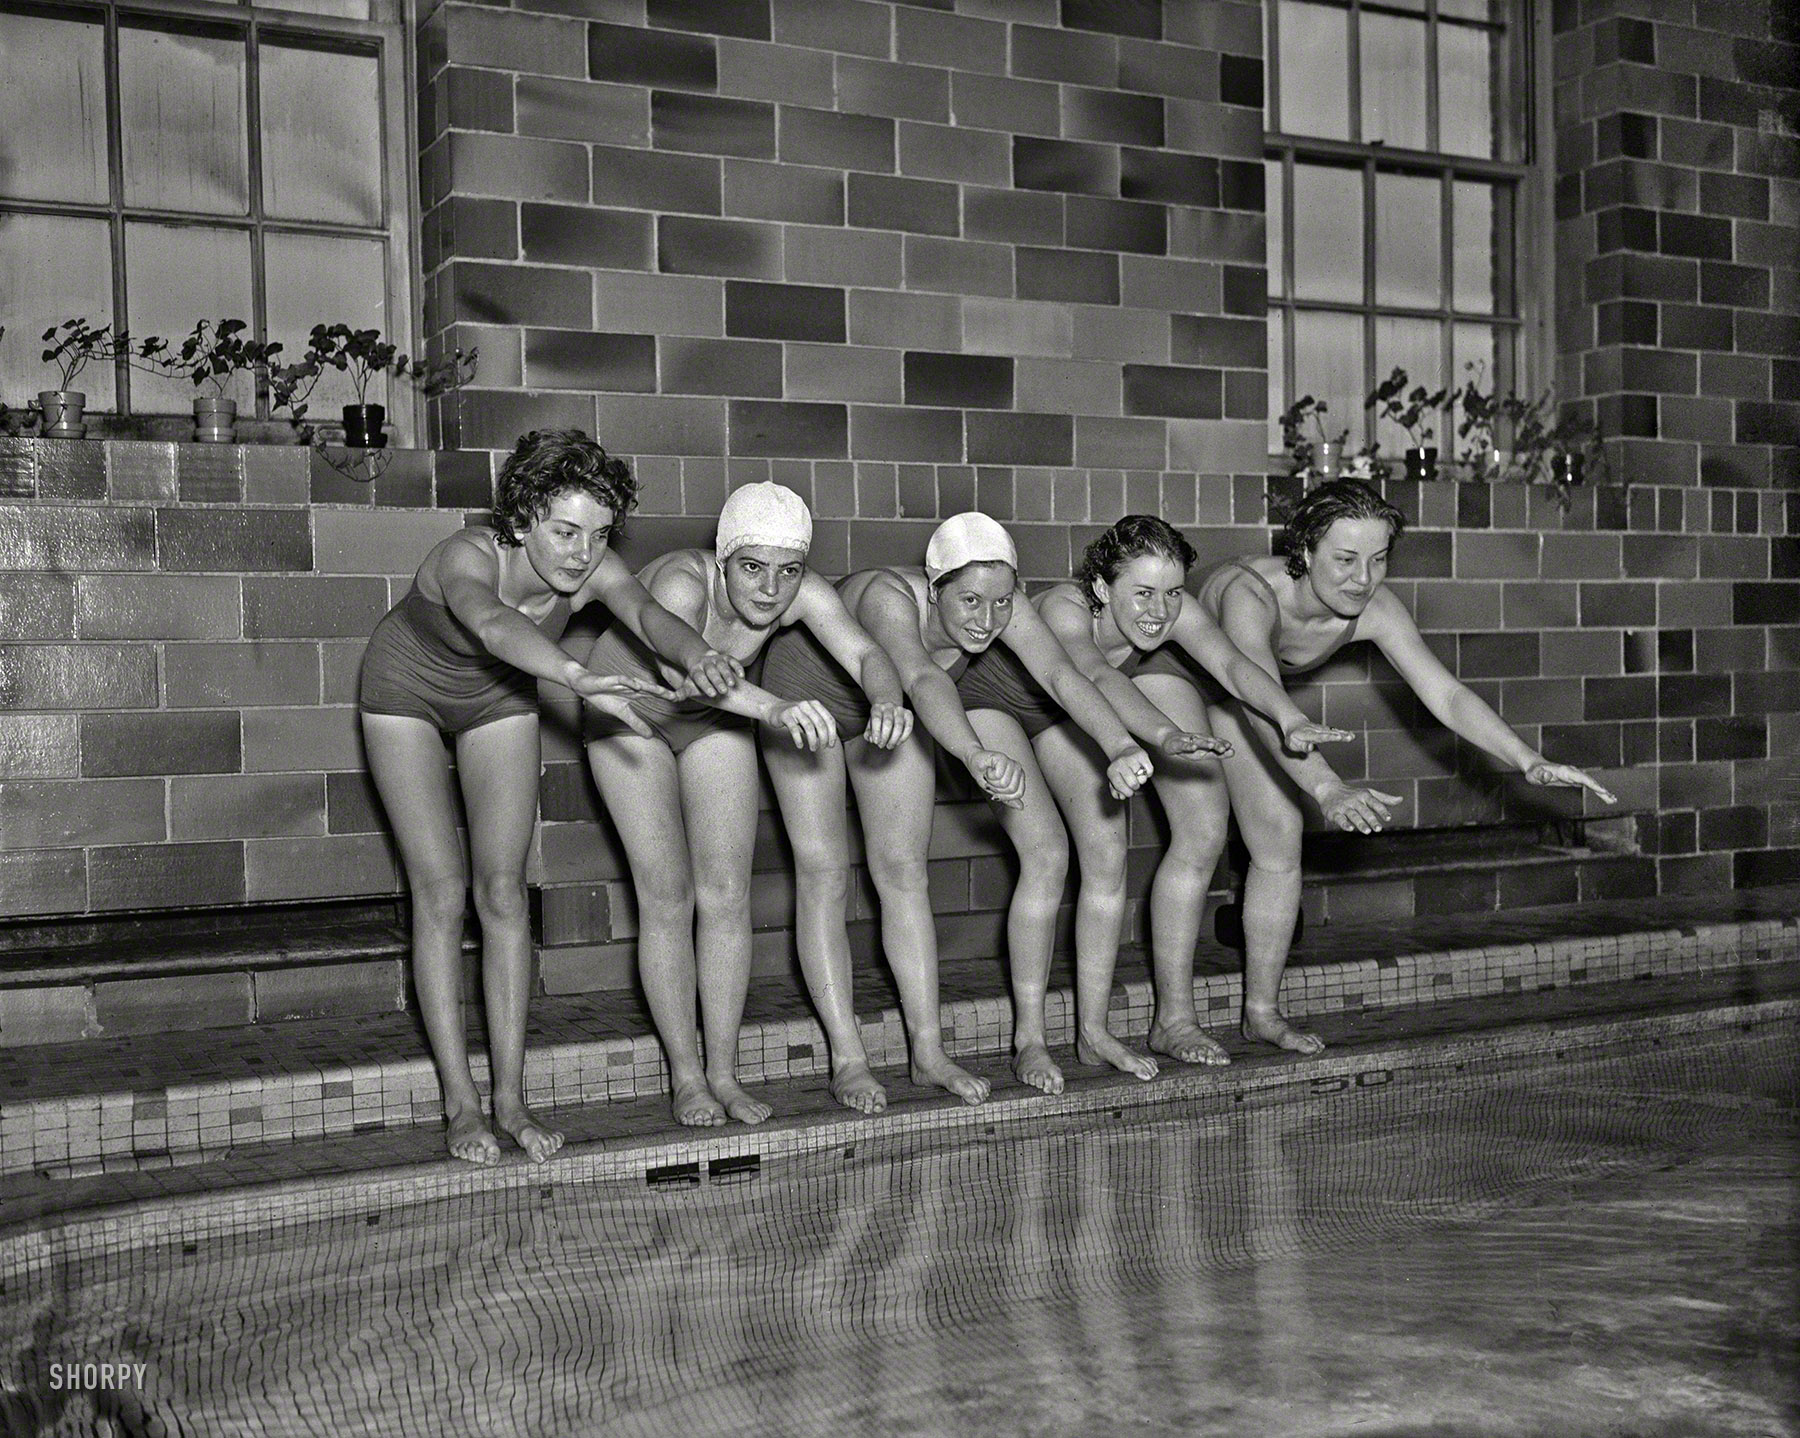 Washington. D.C. "Swimmers, Y.W.C.A. pool -- March 11, 1936." An interesting mix of tan lines. Harris & Ewing glass negative. View full size.